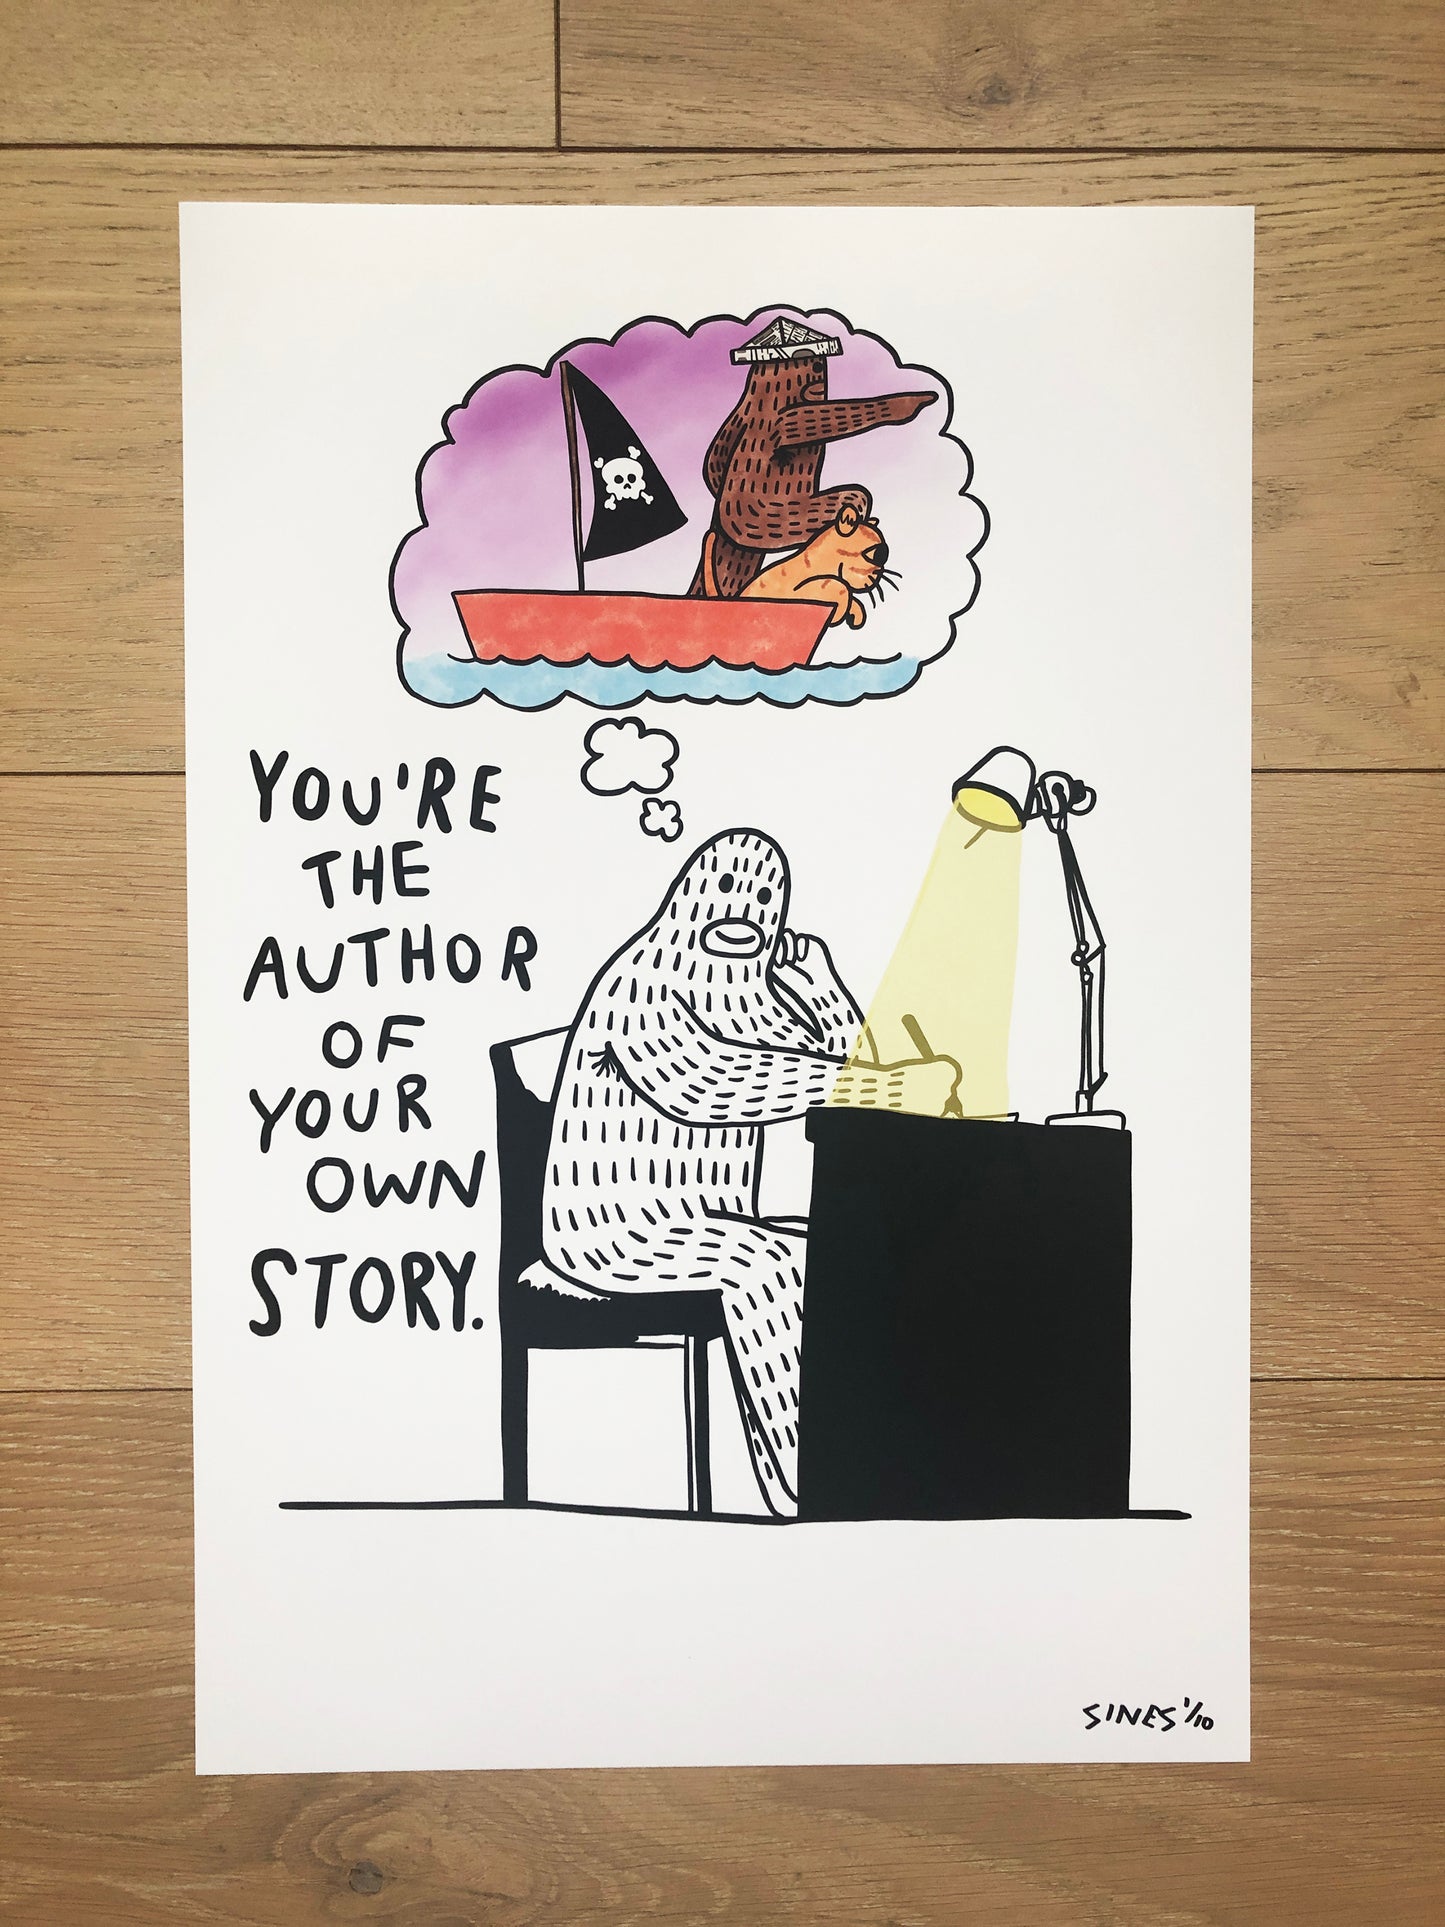 #24 - Your Story